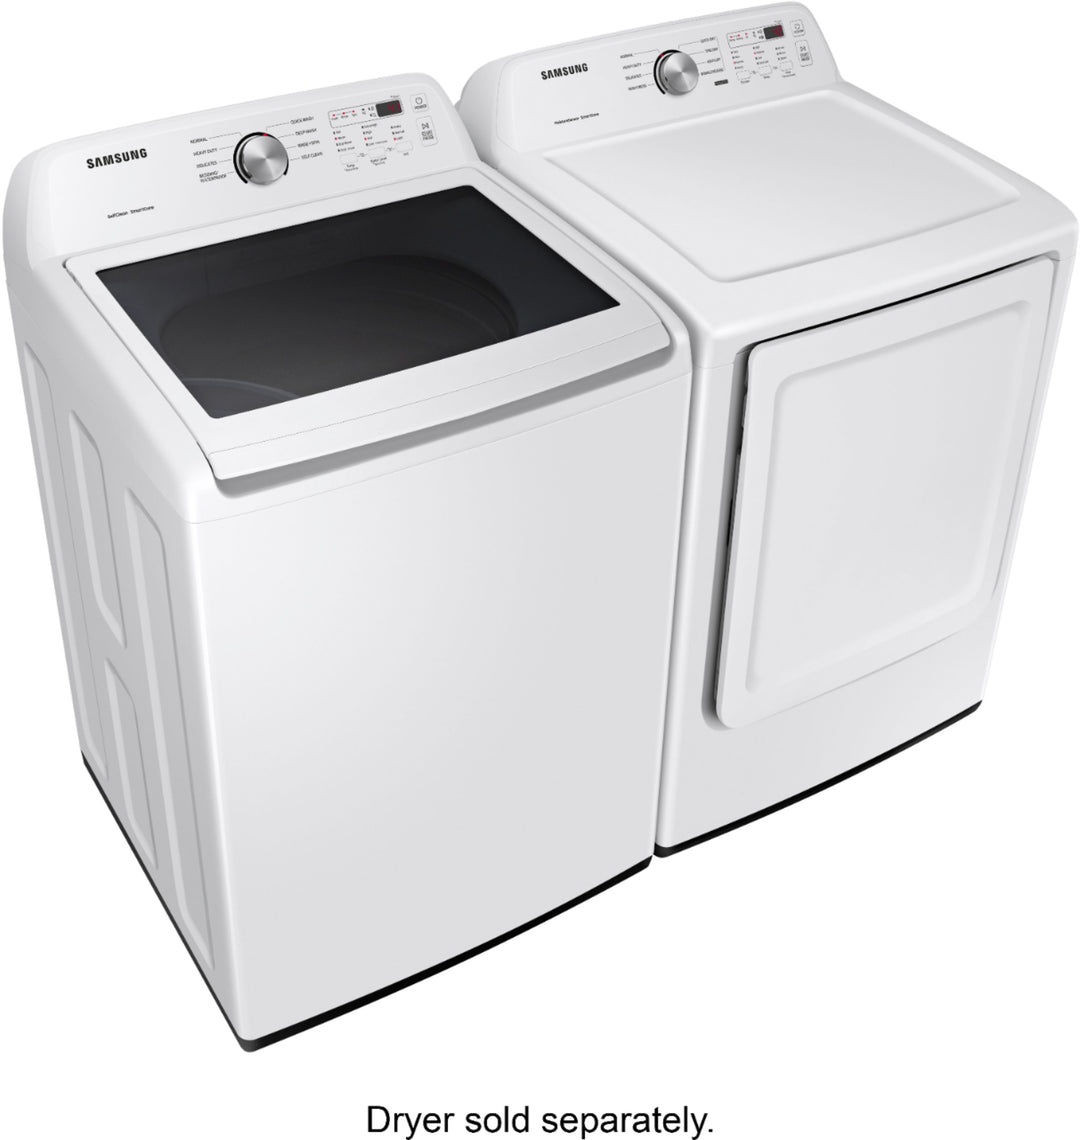 Samsung - 4.5 Cu. Ft. High Efficiency Top Load Washer with Vibration Reduction Technology+ - White_9